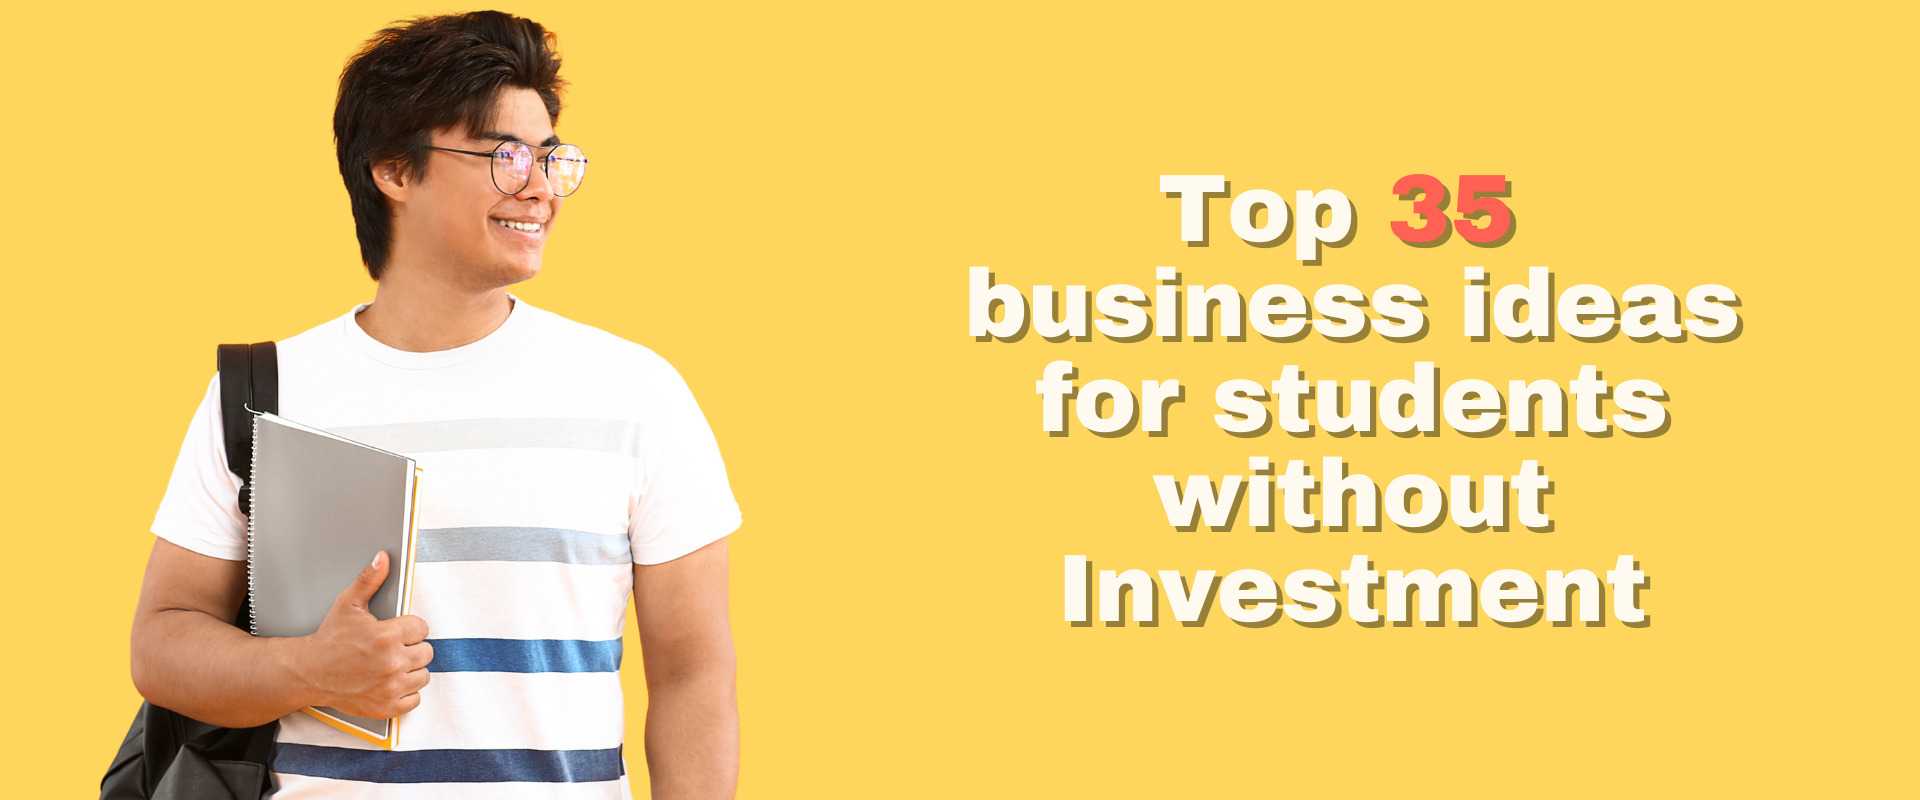 business ideas for students without Investment